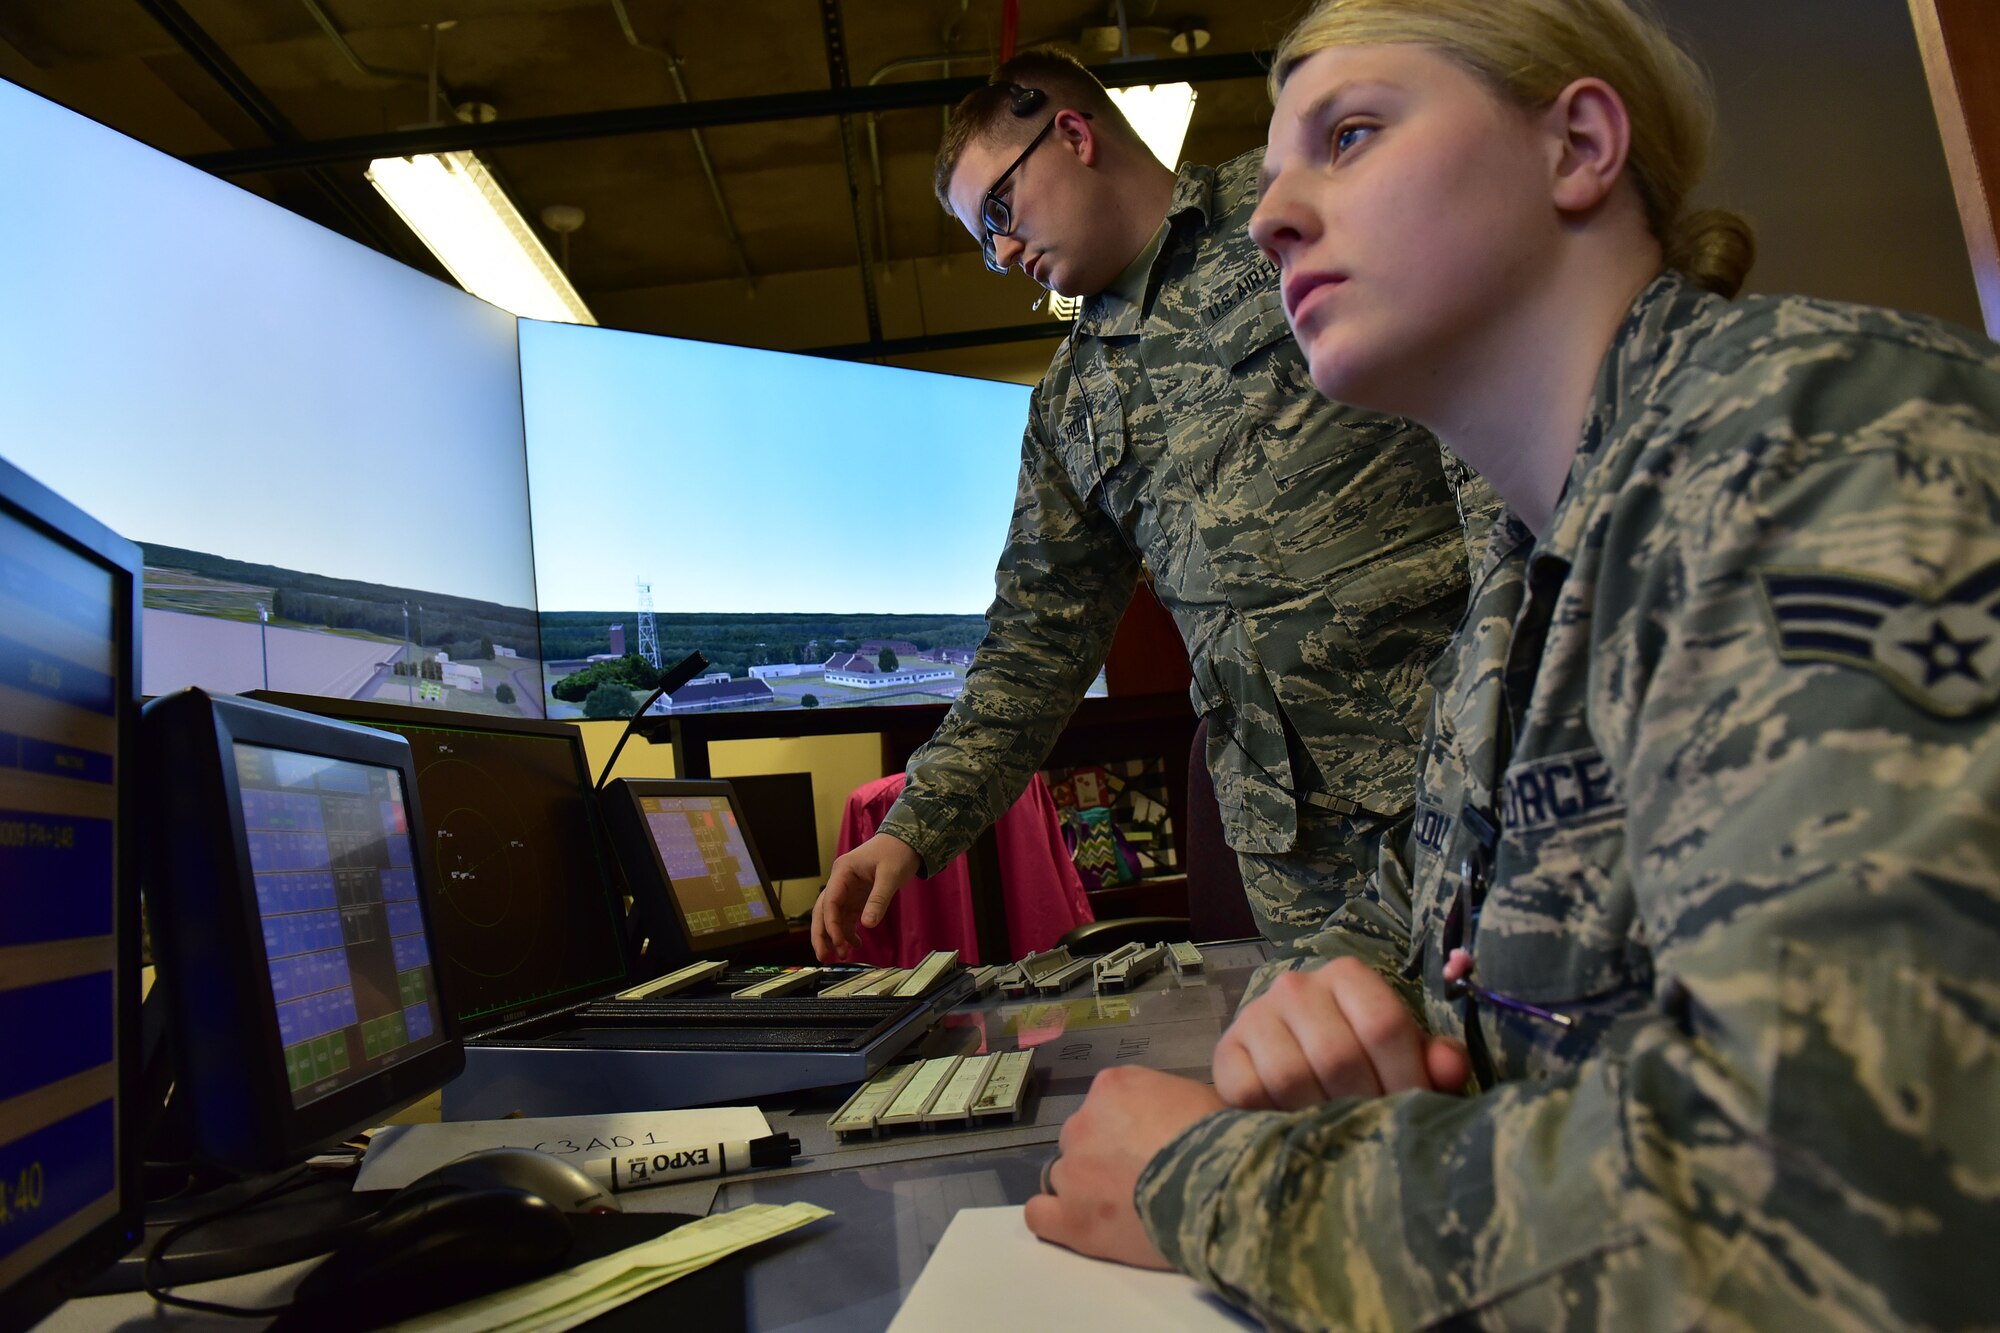 Senior Airman Gabriella Bellou, 19th Operations Support Squadron air traffic control journeyman, and Airman 1st Class Kyle Hood, 19th OSS air traffic control apprentice, use a simulator to assist Hood in his upgrade training Jan. 10, 2018, at Little Rock Air Force Base, Ark. The simulator is the primary tool used in air traffic control upgrade training, which can take up to a year. (U.S. Air Force photo by Airman 1st Class Rhett Isbell)